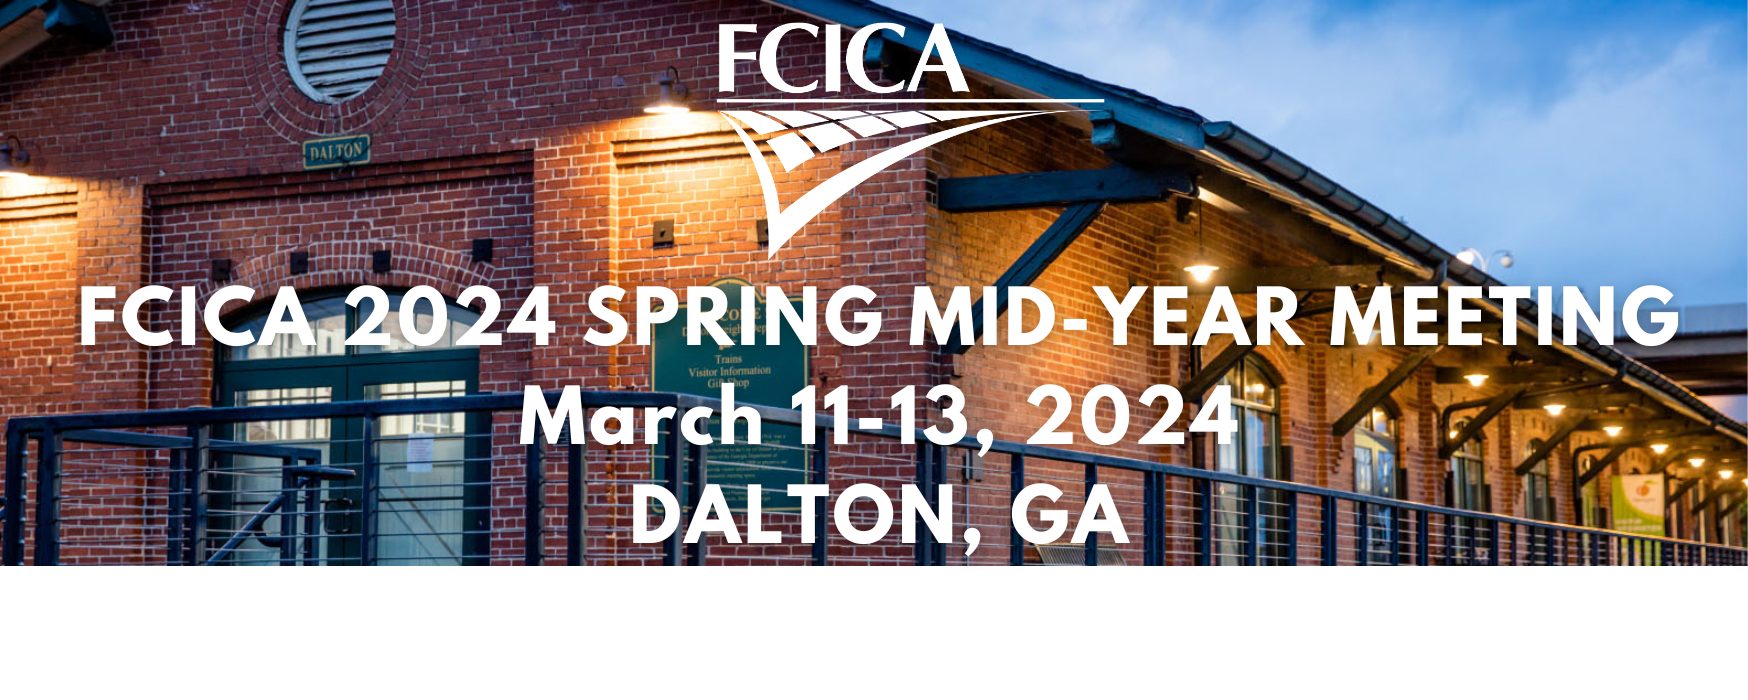 FCICA MYM 2024 Spring Save the Date (1748 x 700 px) (5)